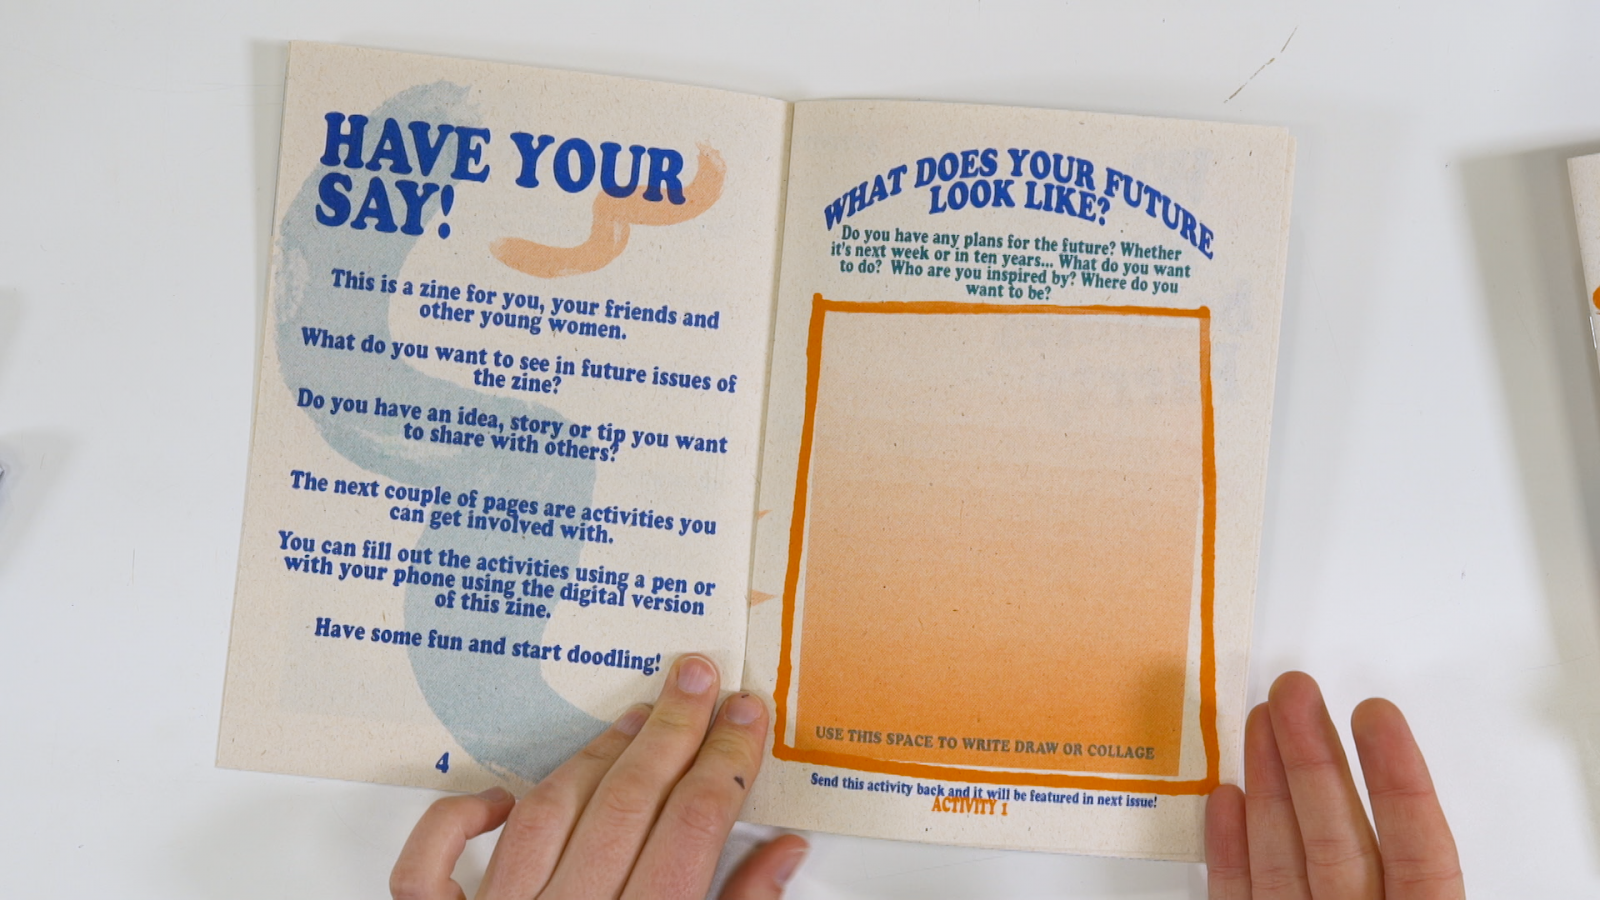 Two hands holding open the Parrty Zine. On the left hand page are the words 'Have your Say!' with a short text underneath expanding on the imperative. The right hand page asks the question 'What does your future look like?' and offers a space where you can draw or write your vision.